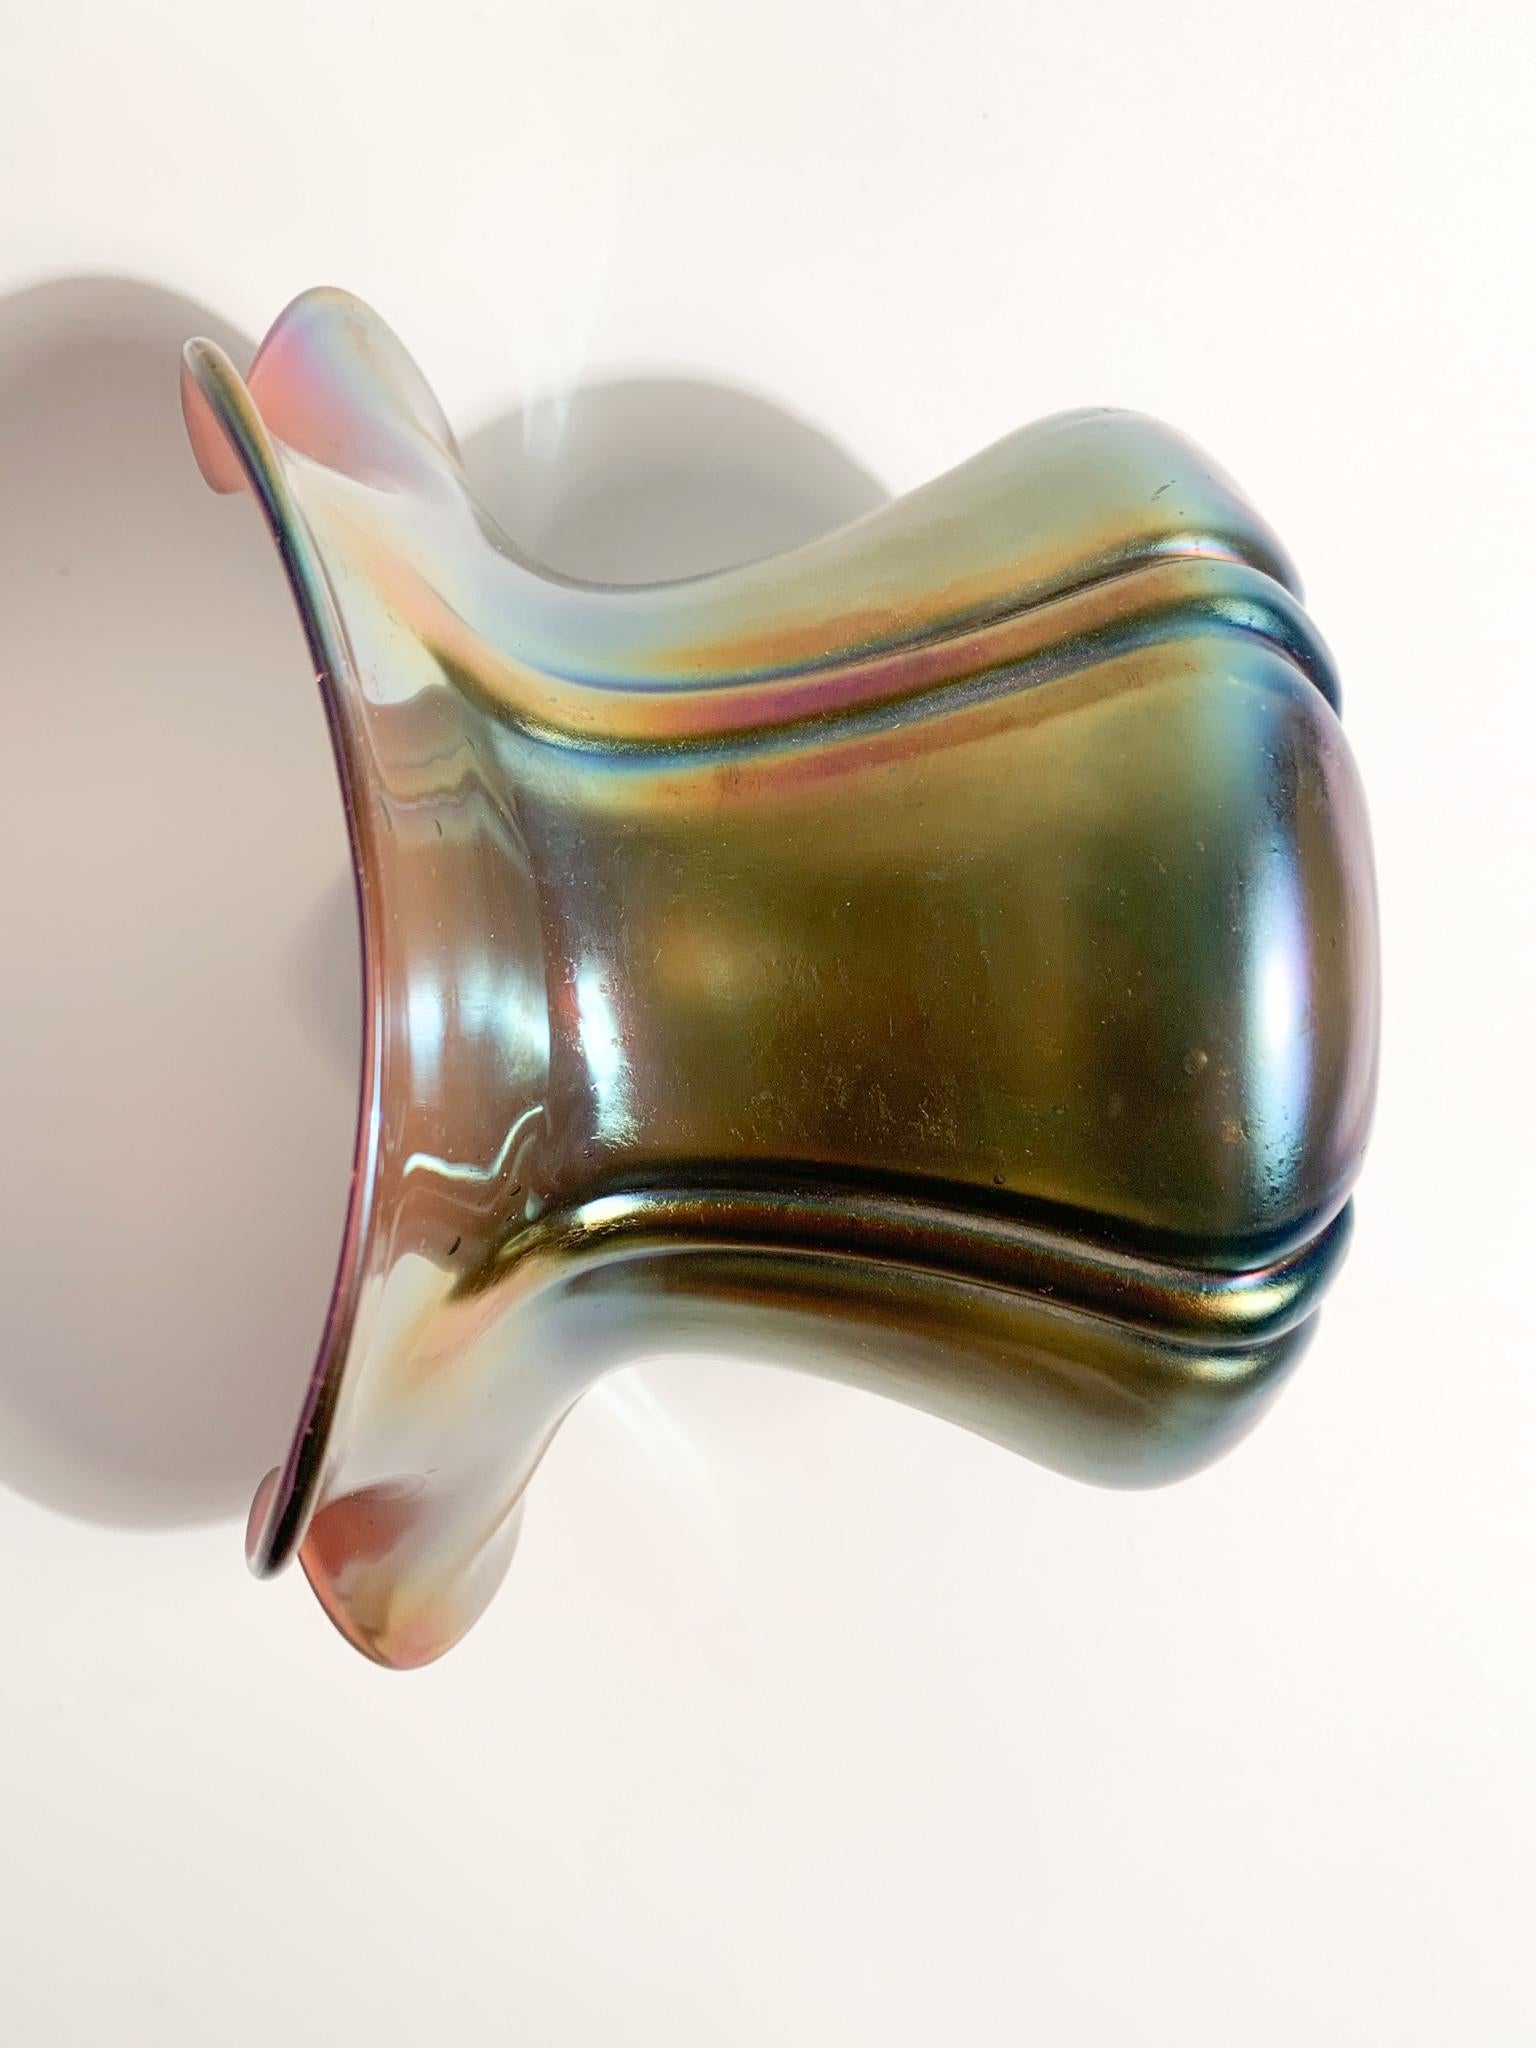 Iridescent Loetz Glass Vase with Flower Opening, 1940s For Sale 1